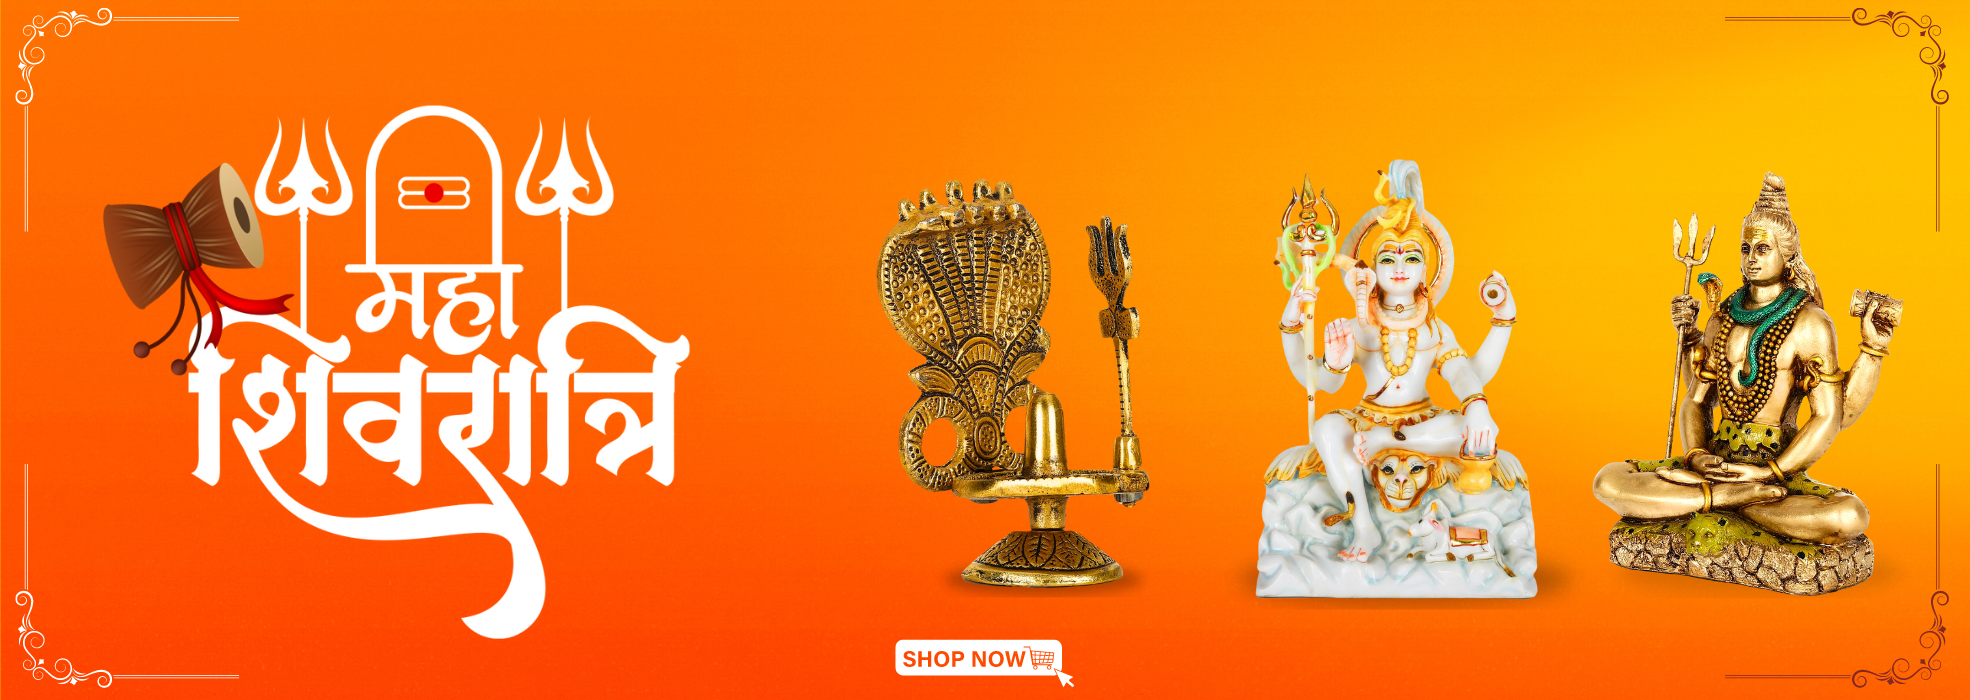 Bring Home the Blessing This Mahashivratri with Handmade Arts & Crafts